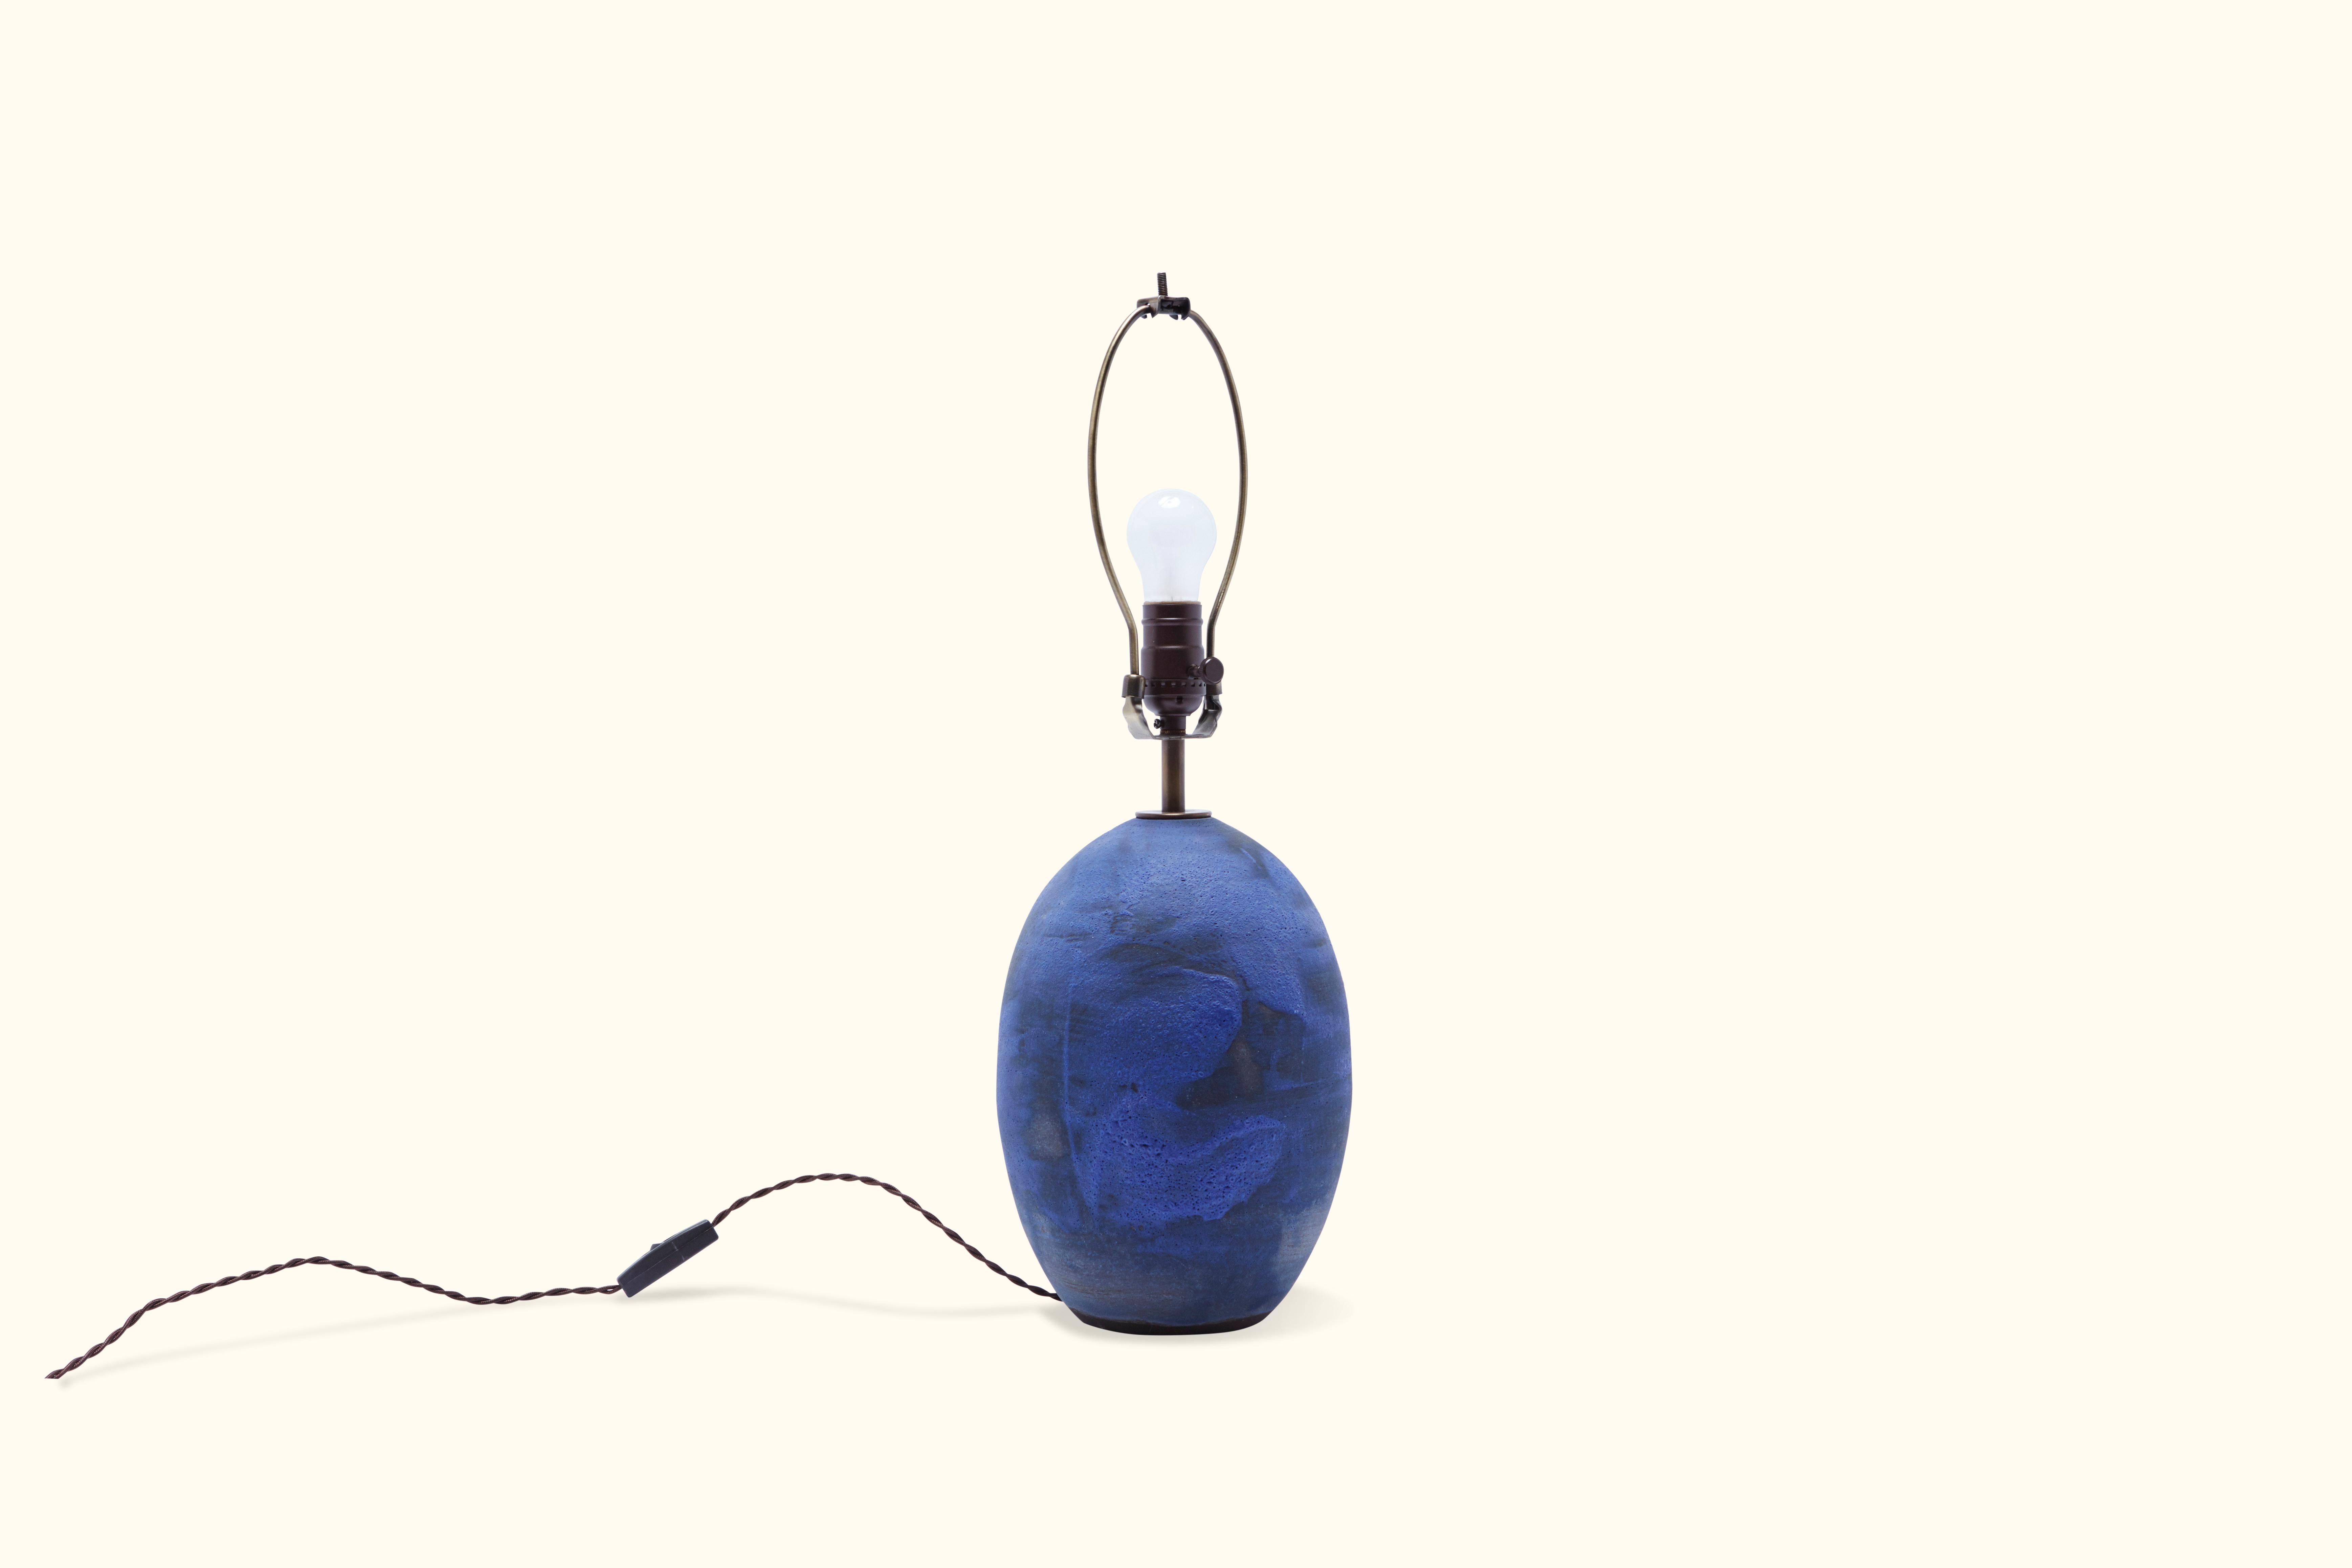 Ceramic egg-shaped lamp with matte blue and black glaze handmade in Los Angeles by Victoria Morris.